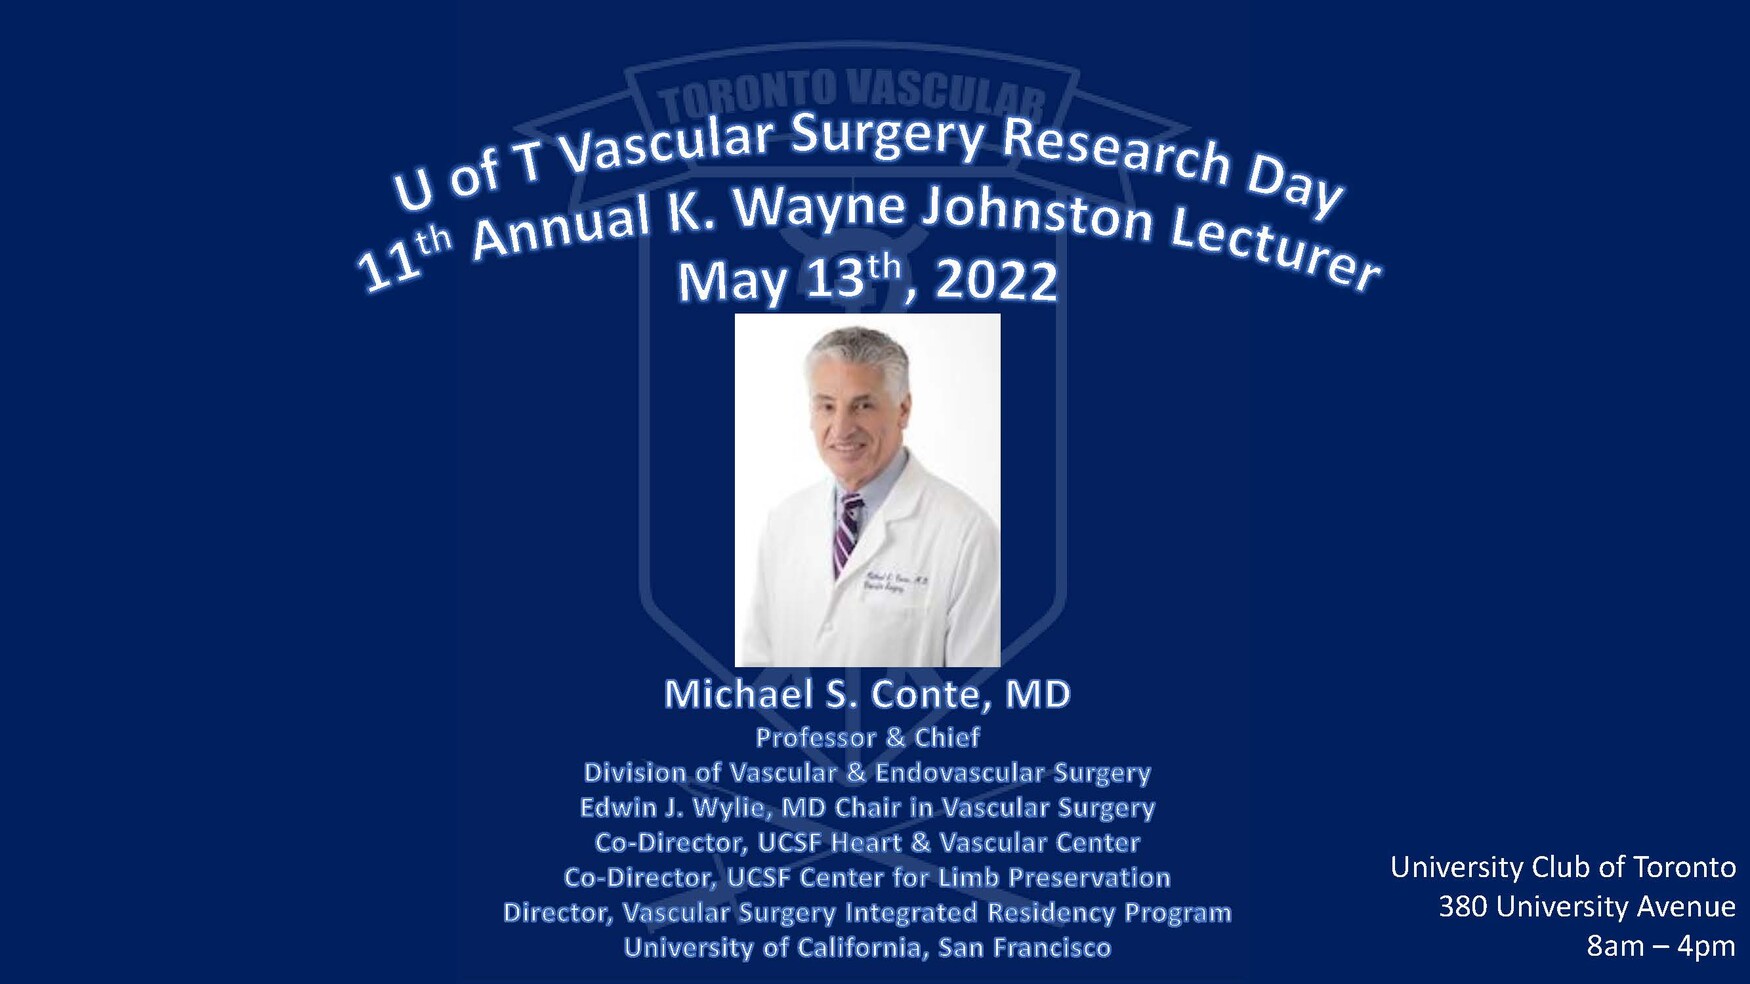 Vascular Surgery Research Day 2022